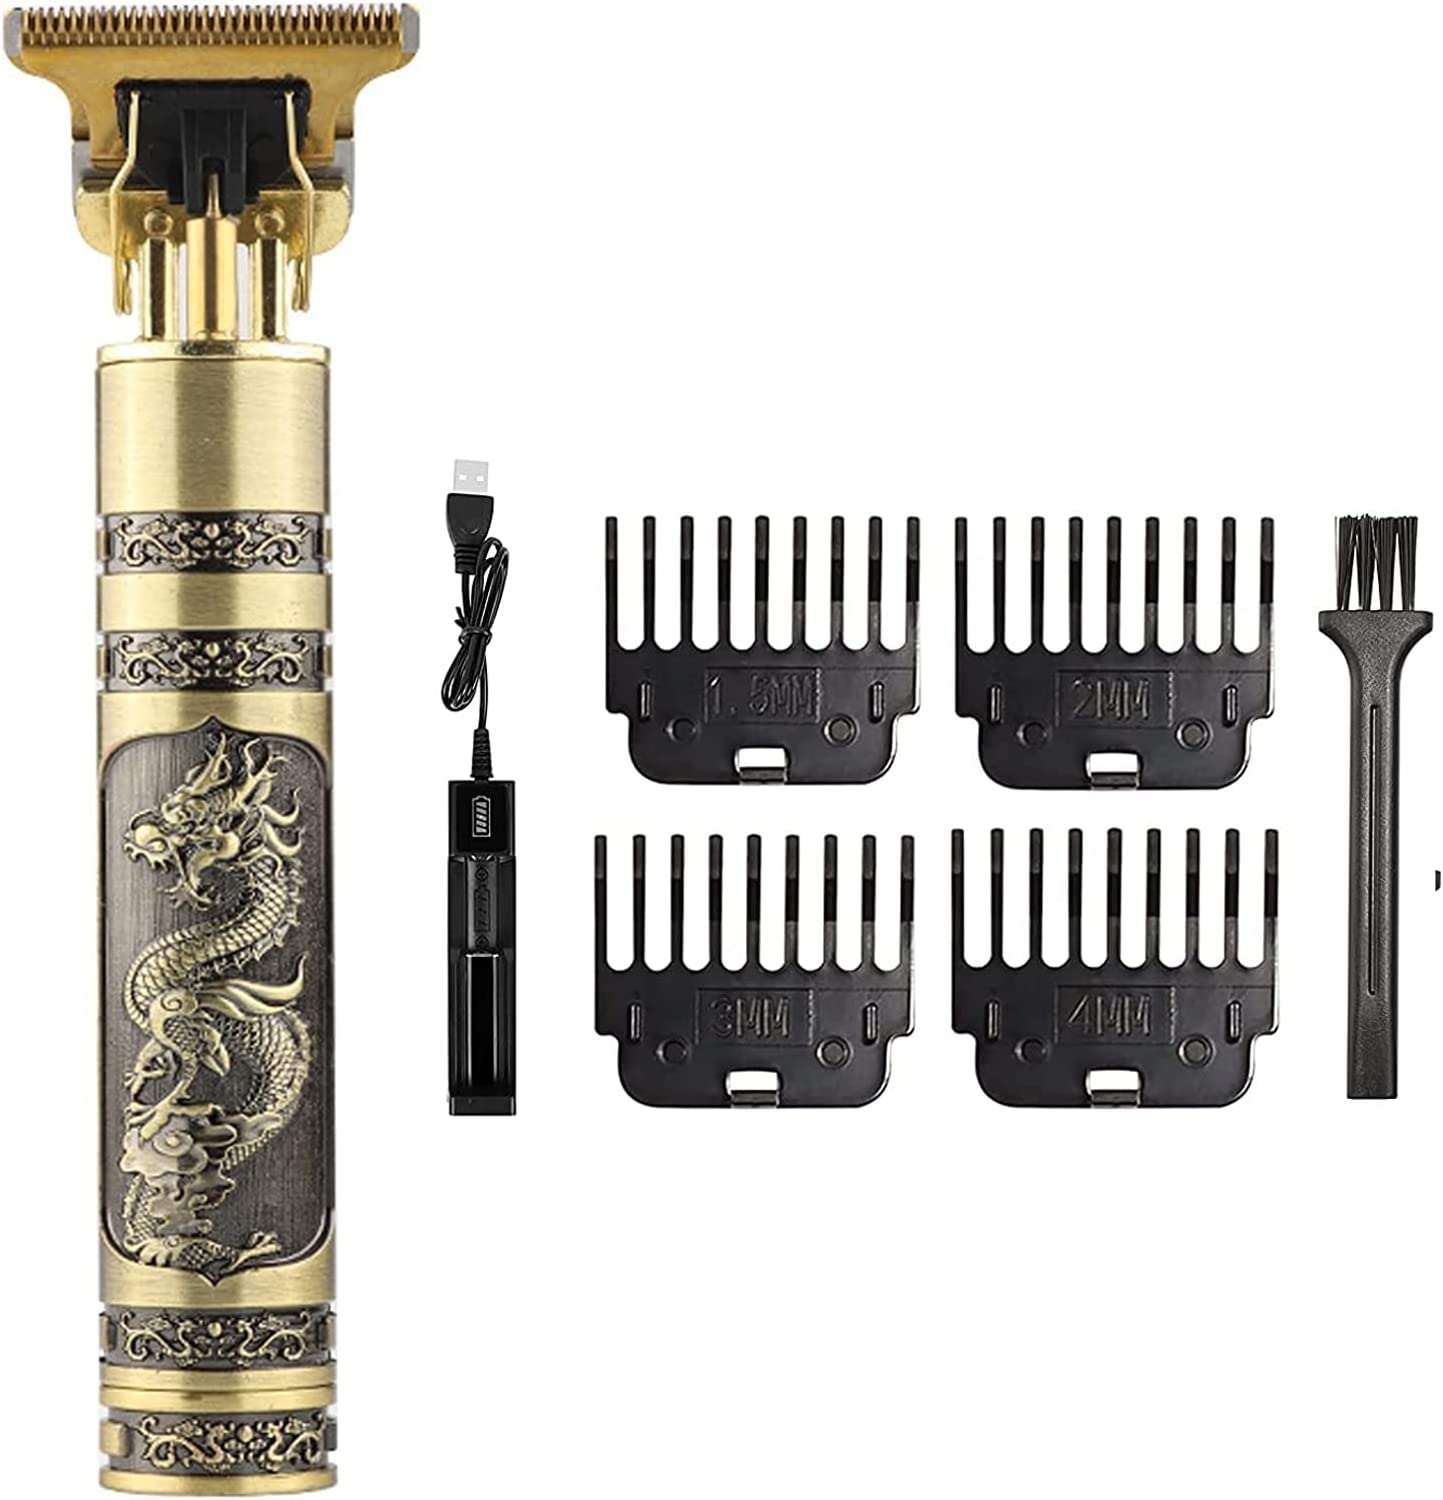 Professional T9 Trimmer: Precision Grooming Tool